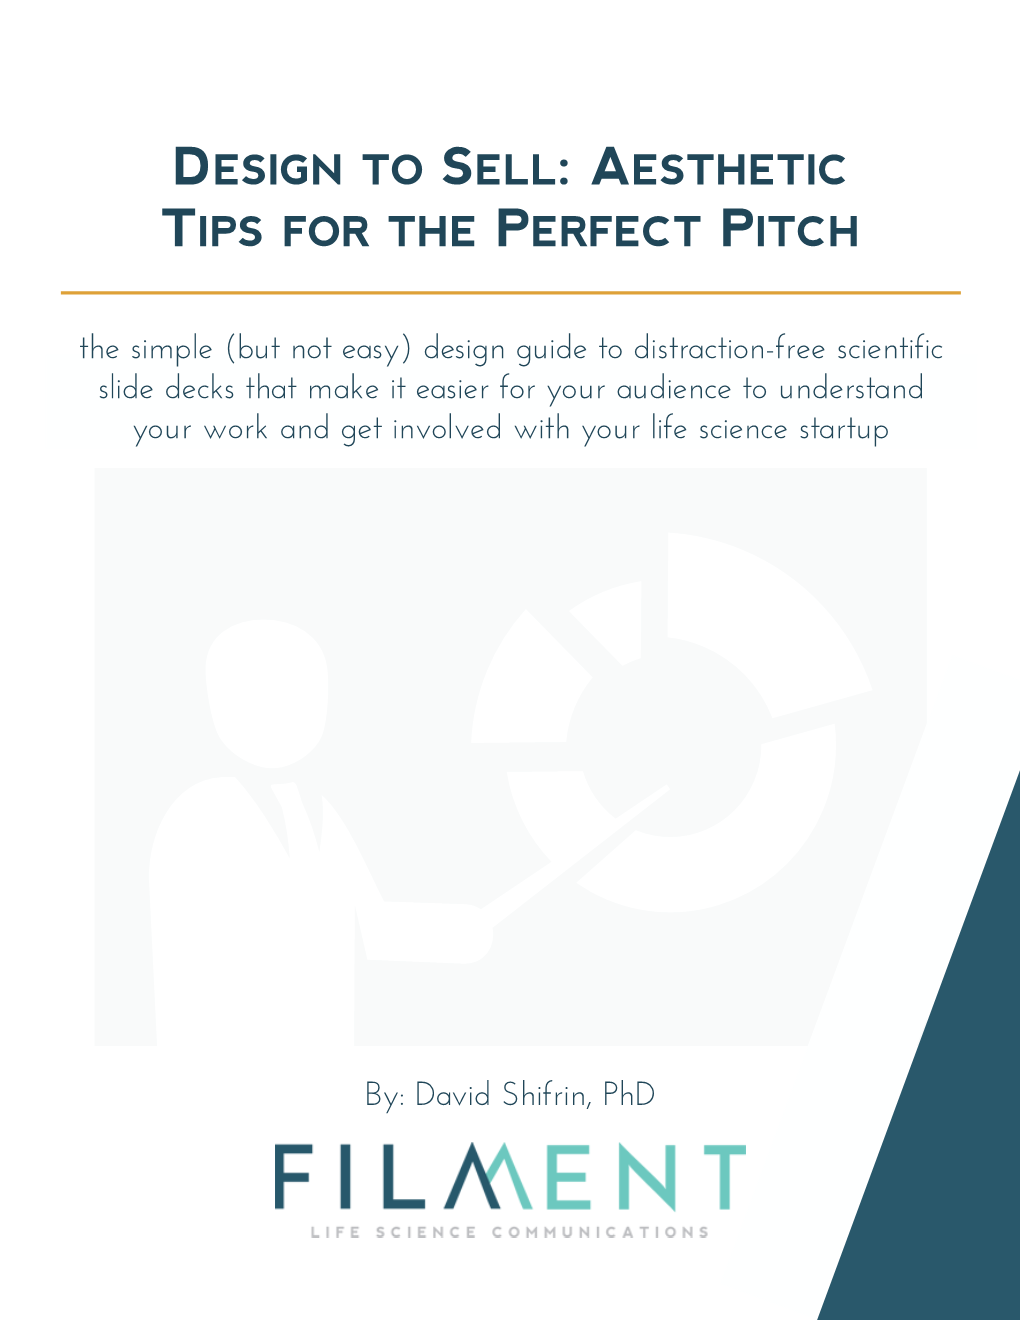 Design to Sell: Aesthetic Tips for the Perfect Pitch